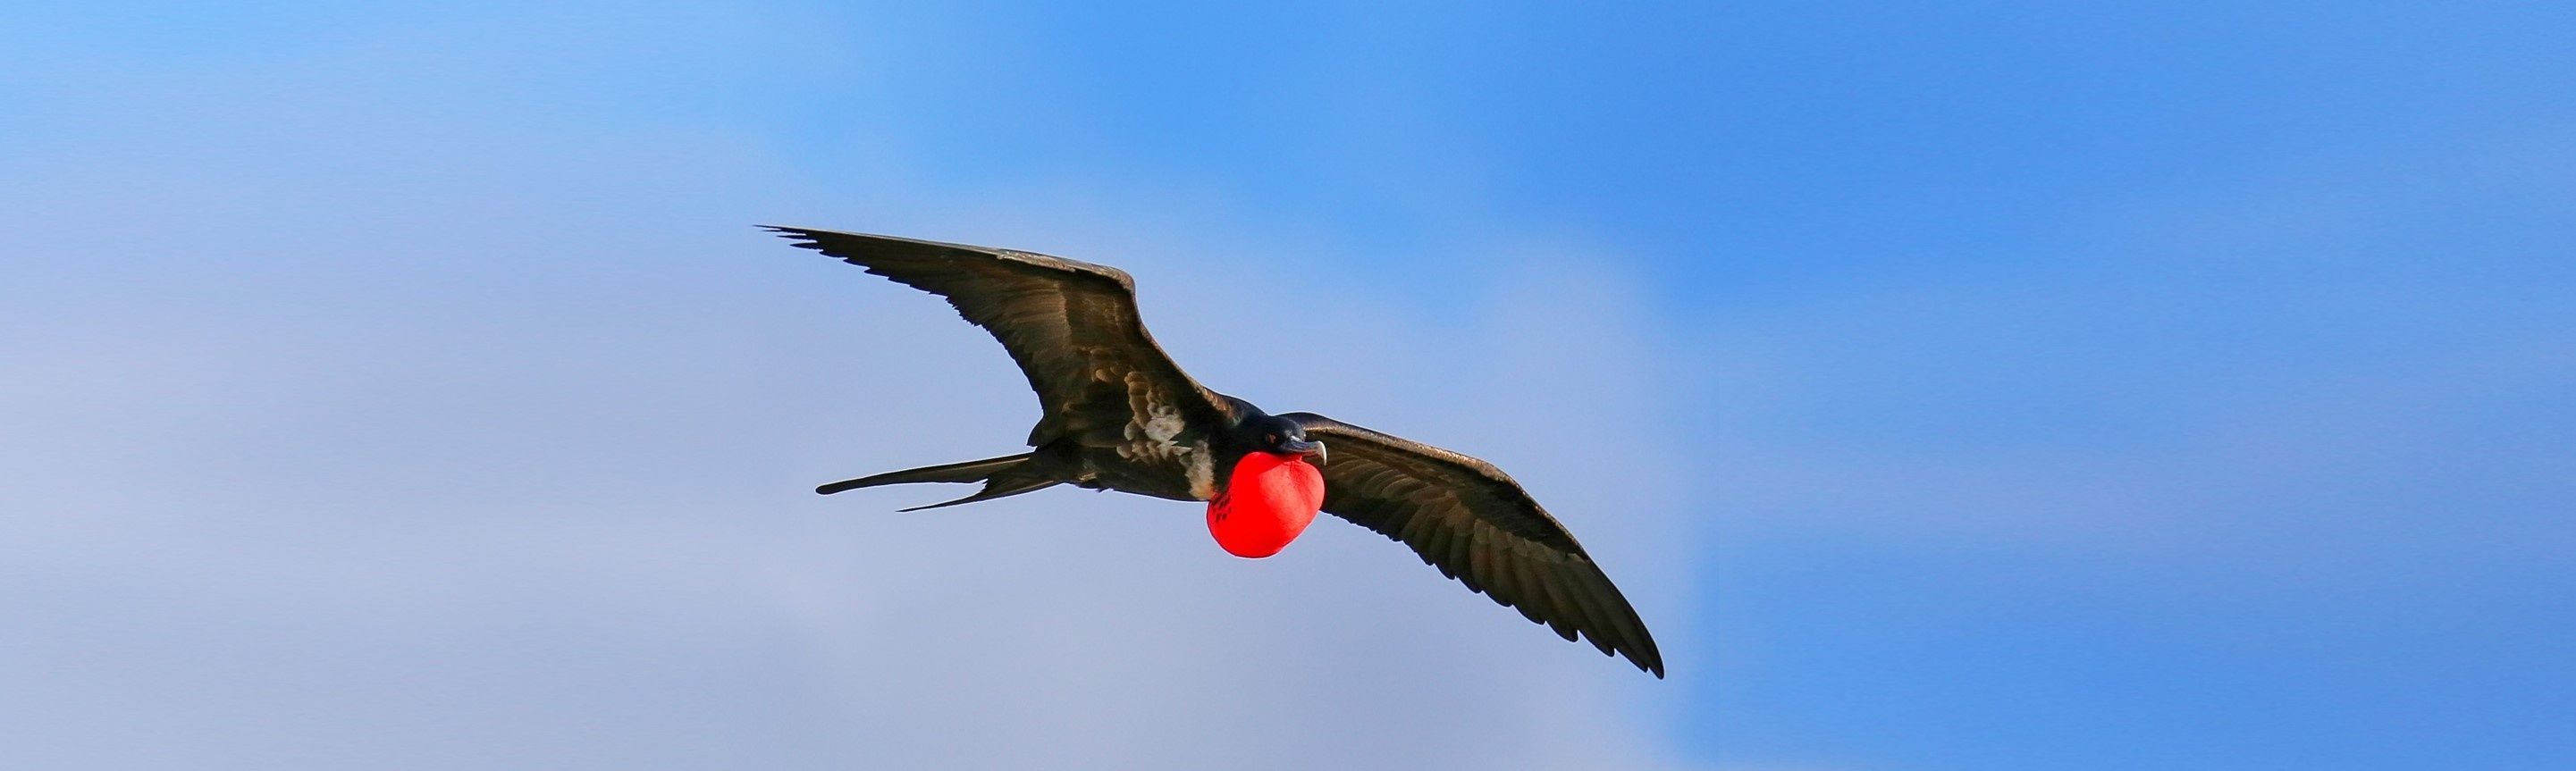 Nonstop Flight: How The Frigatebird Can Soar For Weeks Without Stopping :  The Two-Way : NPR